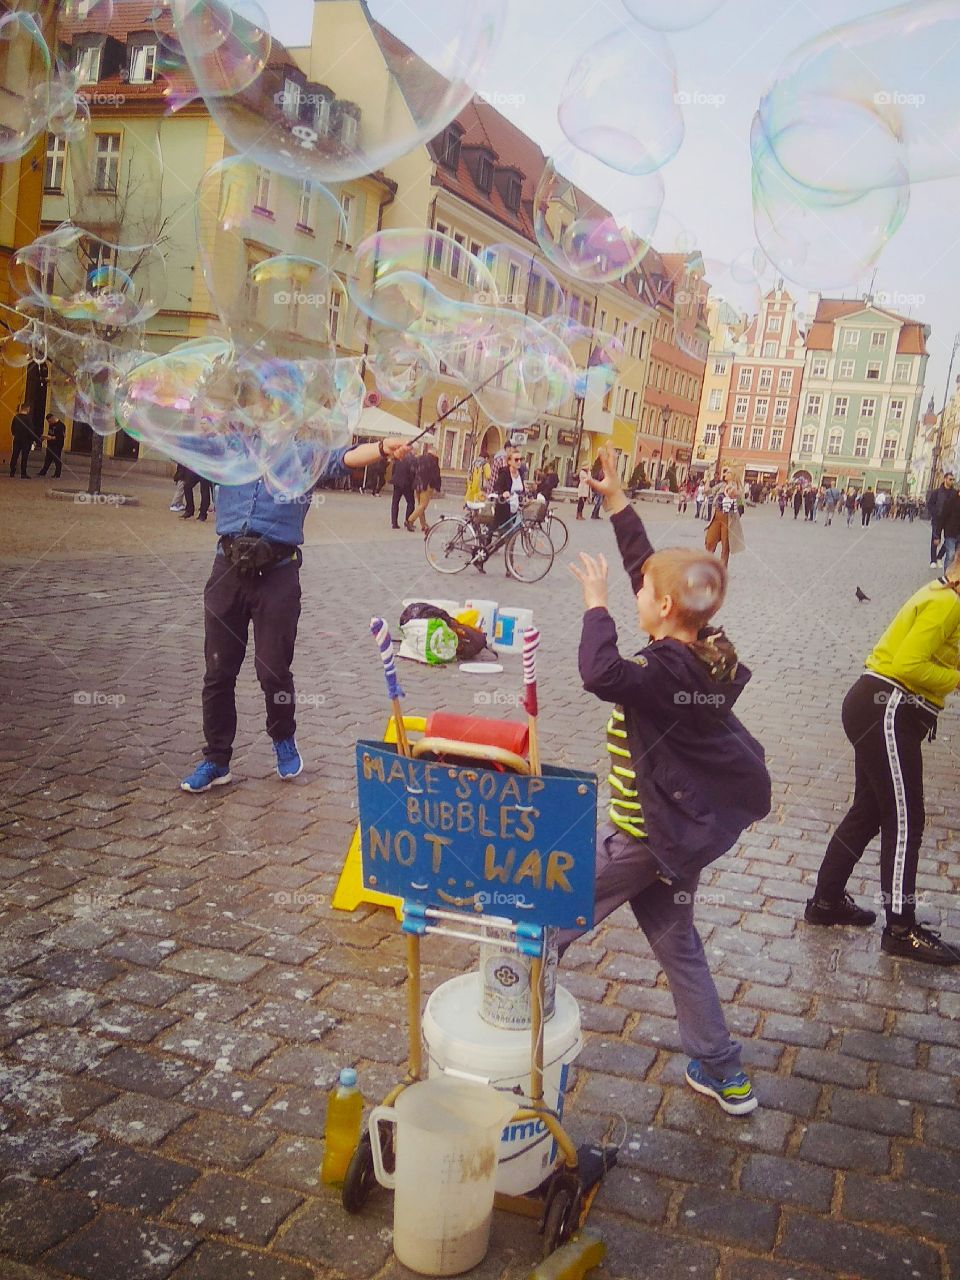 I don't know if he'll catch the bubble, but he has already caught happiness, for sure! 

Wrocław, Poland